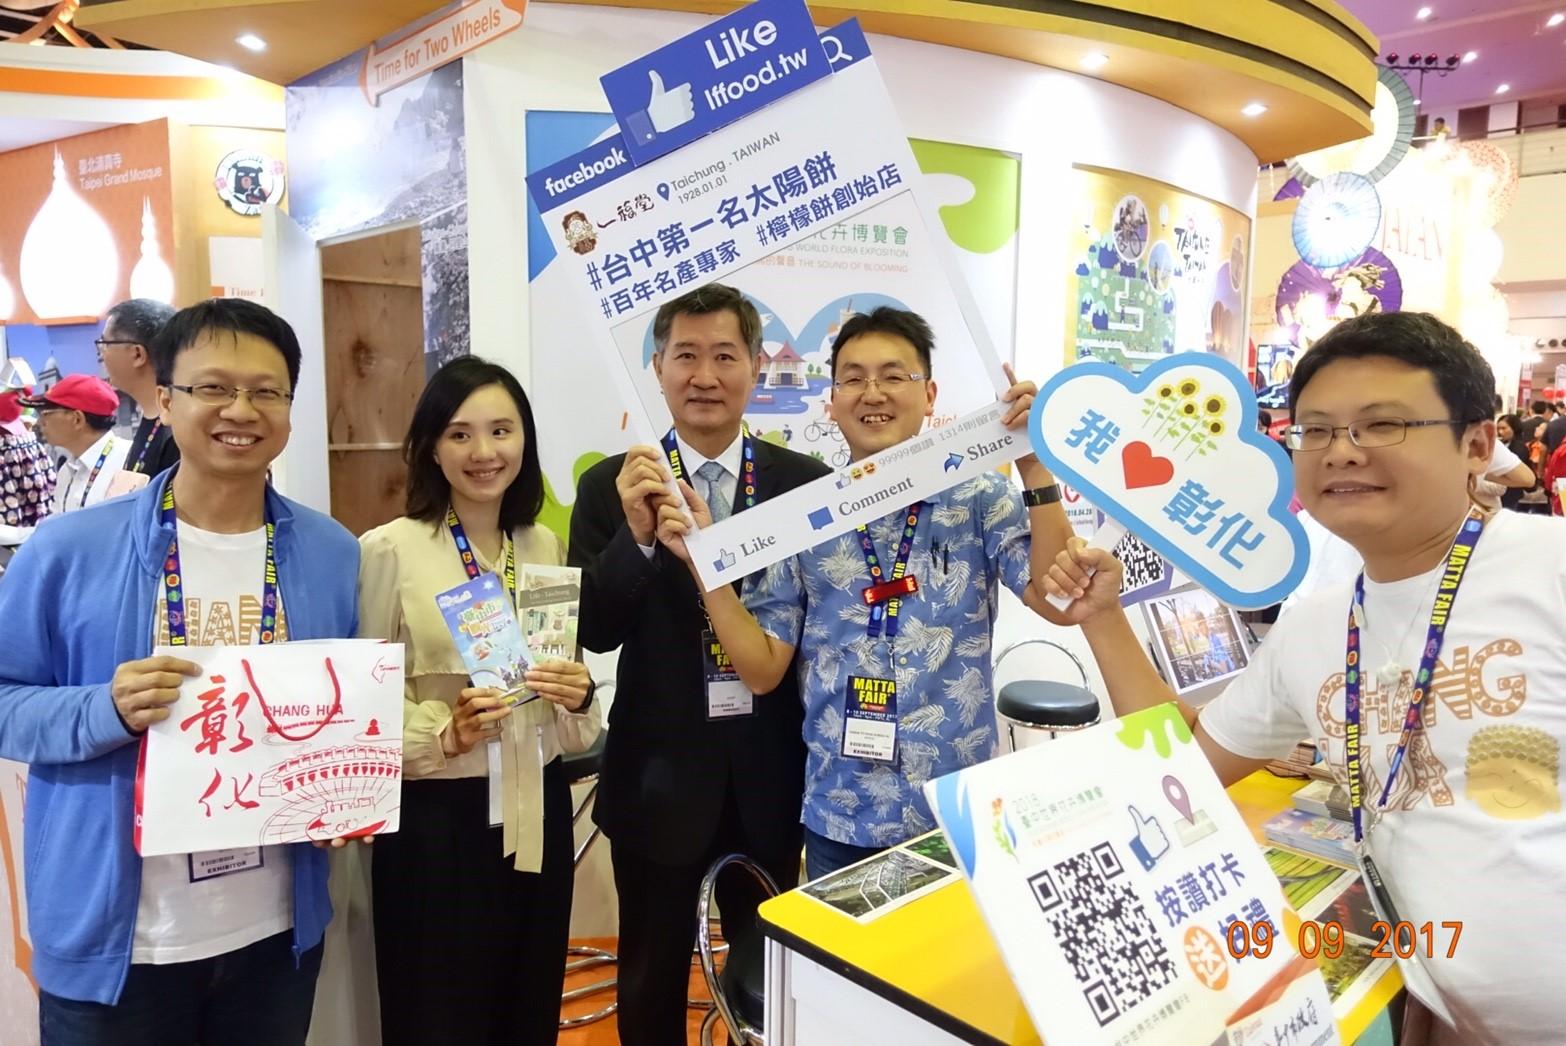 2017 KL MATTA Fair was held at PWTC on 8-10 September 2017, Deputy Representative Michael S.Y. Yiin came to Taiwan Pavilion on 9 September 2017 and thanked Taiwan Delegation for their working hard to promo Taiwan Tourism!  
